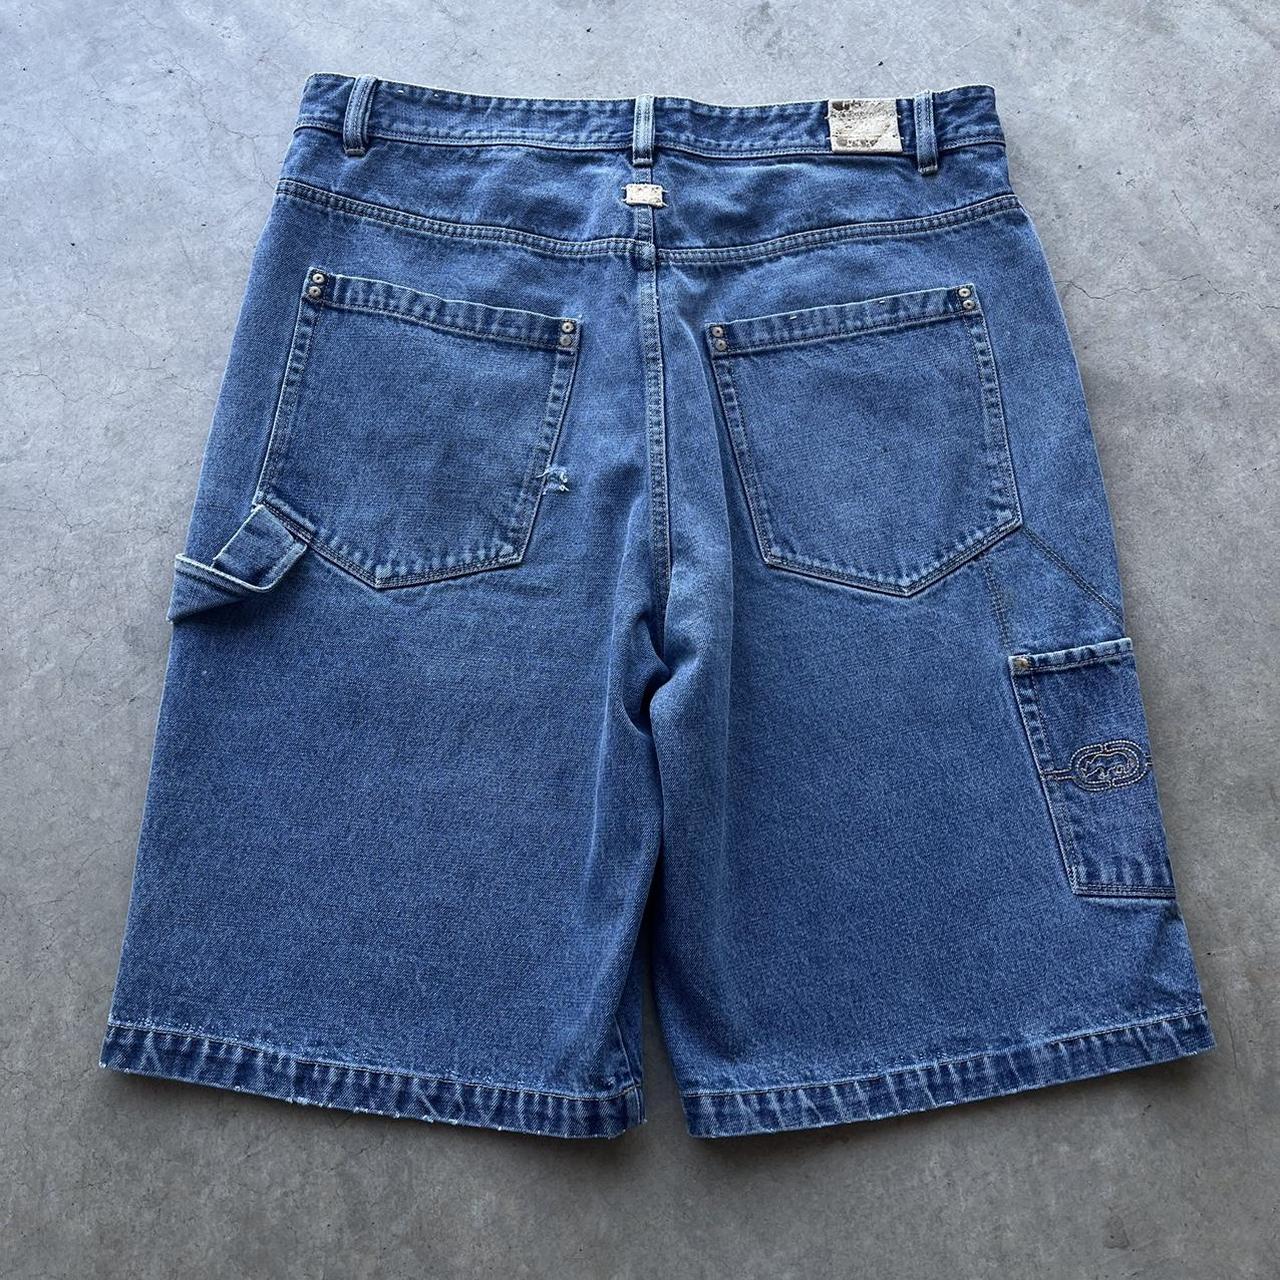 y2k grunge baggy jorts baggy jorts from the early... - Depop